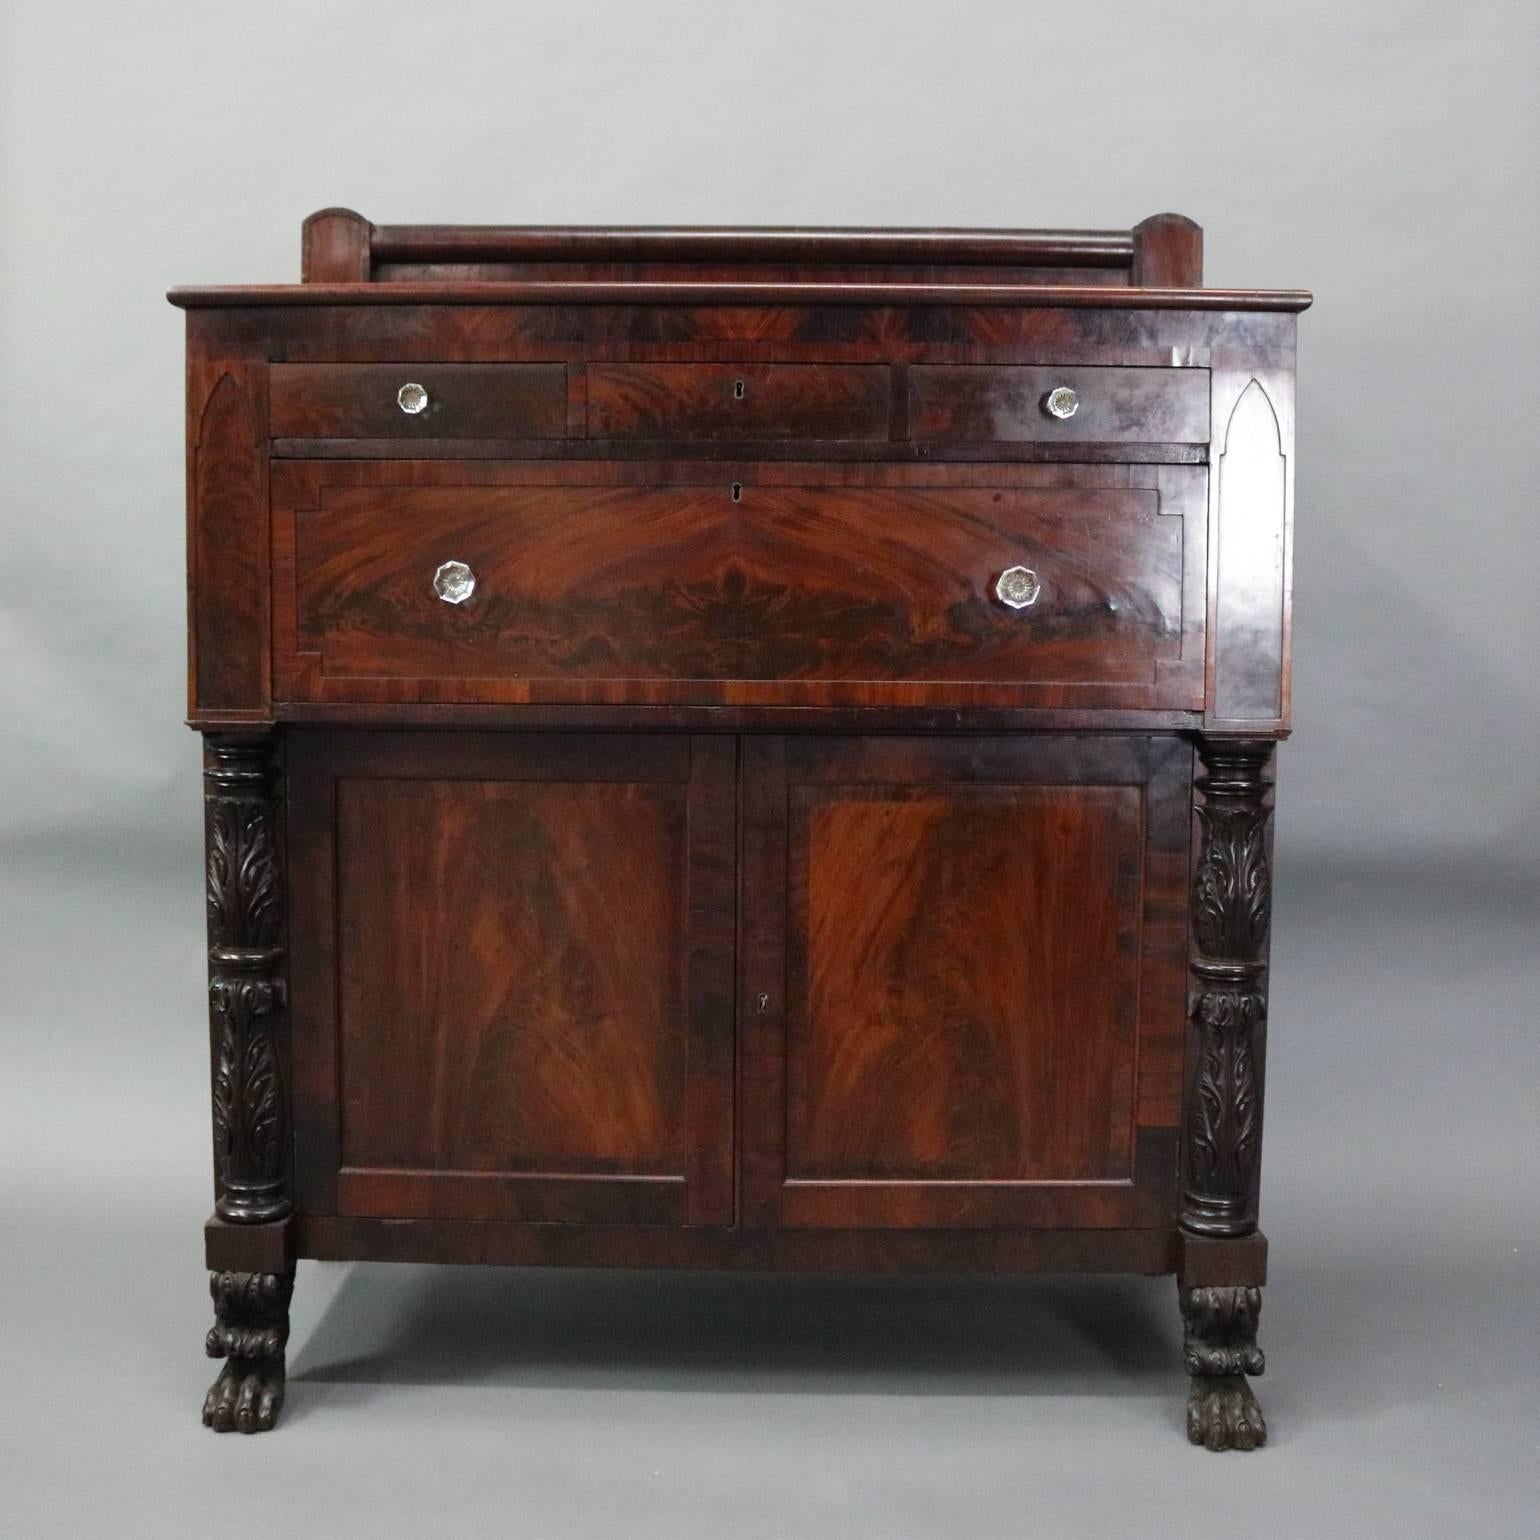 Antique Jackson press features bookmatched flame mahogany doors and drawers with flanking carved acanthus columns supported on paw feet, glass knobs, circa 1850

Measures: 60